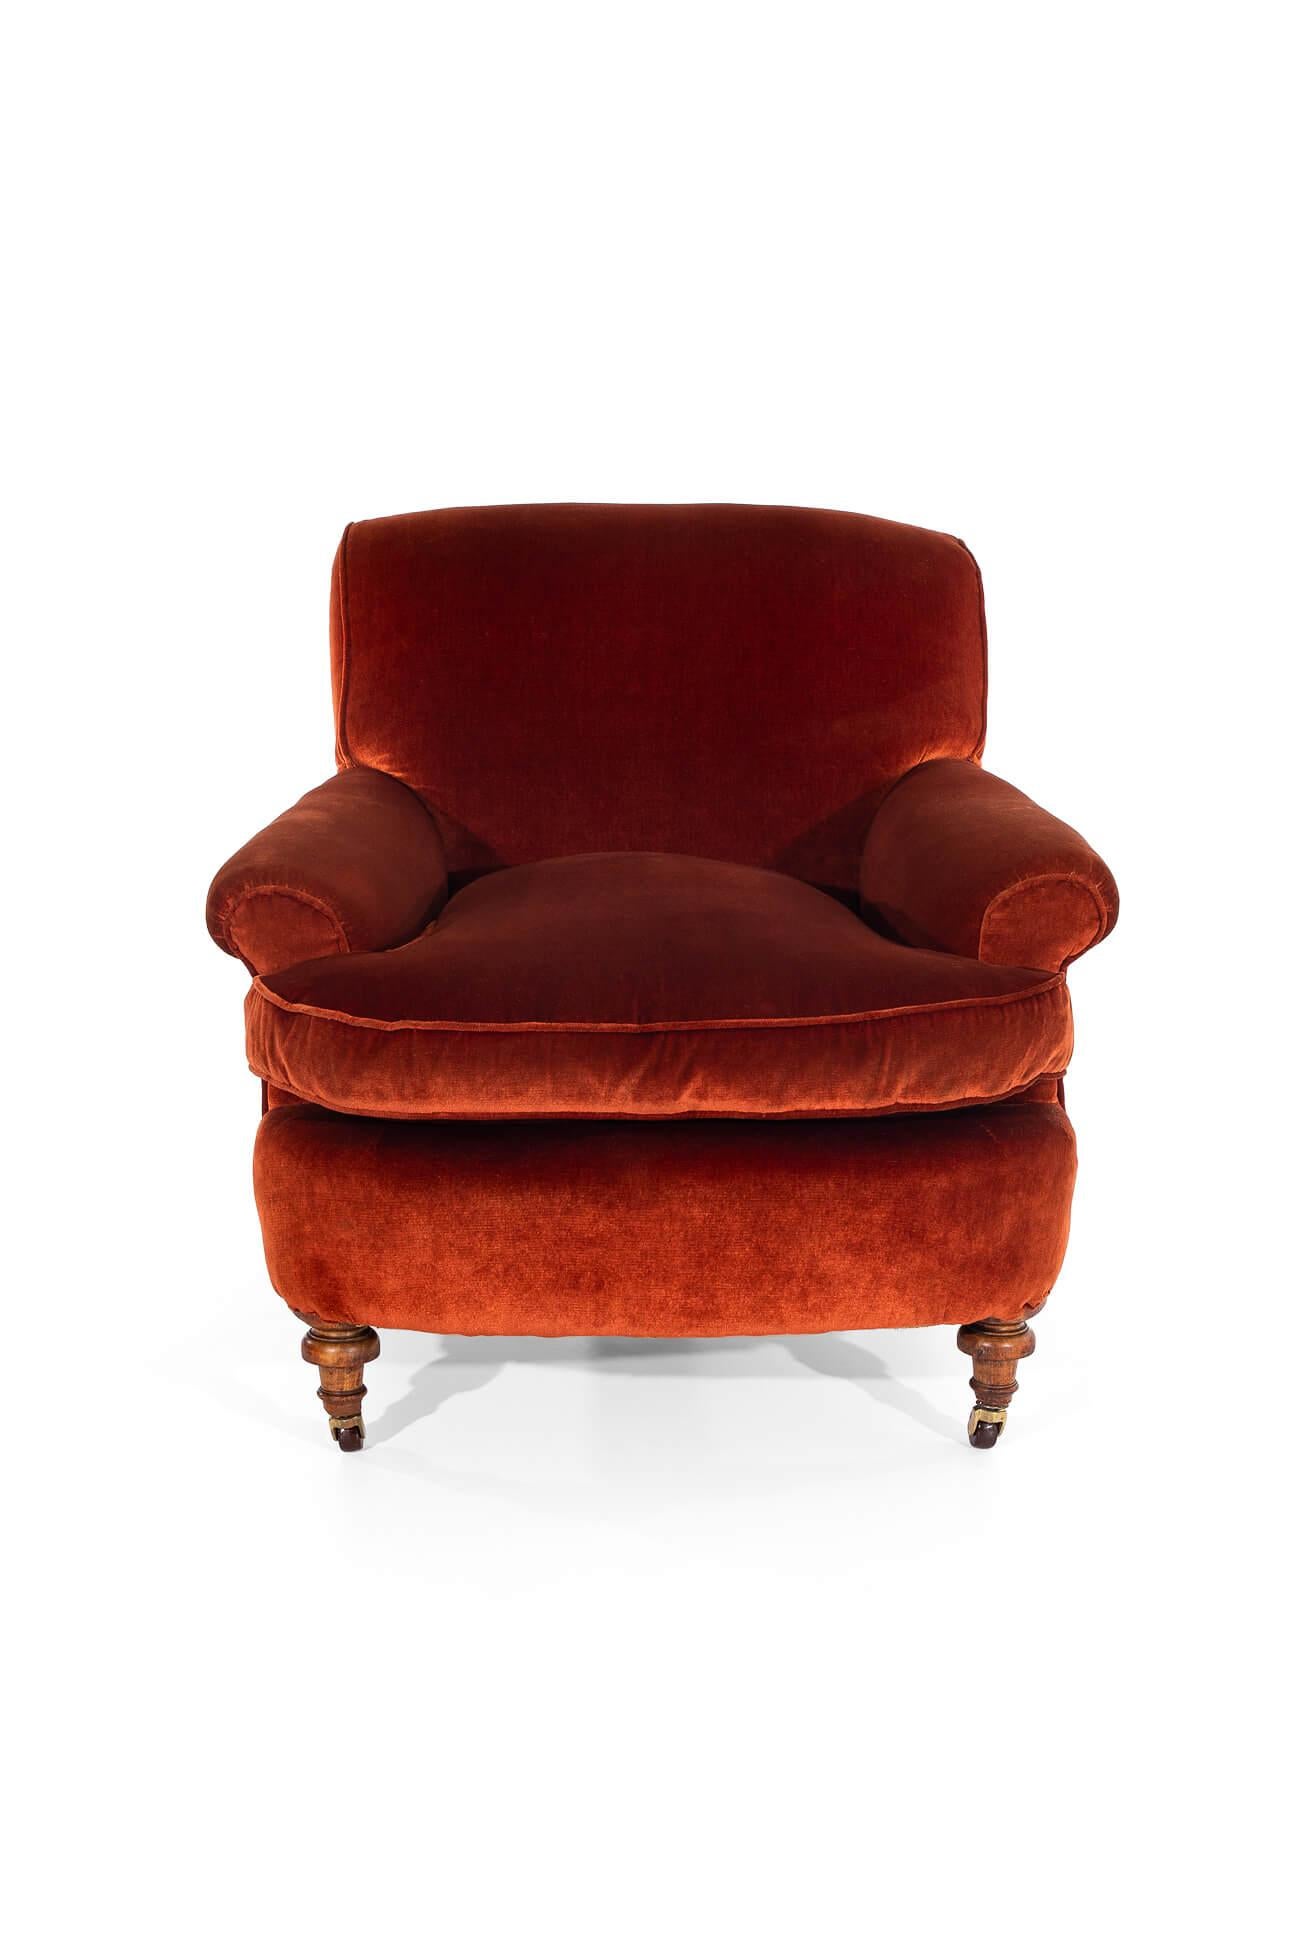 A fabulous burnt orange armchair of generous proportions.

Featuring a high back, scrolling arms and inviting wide and deep seat.

Mahogany frame with turned front legs raised on original brass castors.

Fully reupholstered with hessian and calico